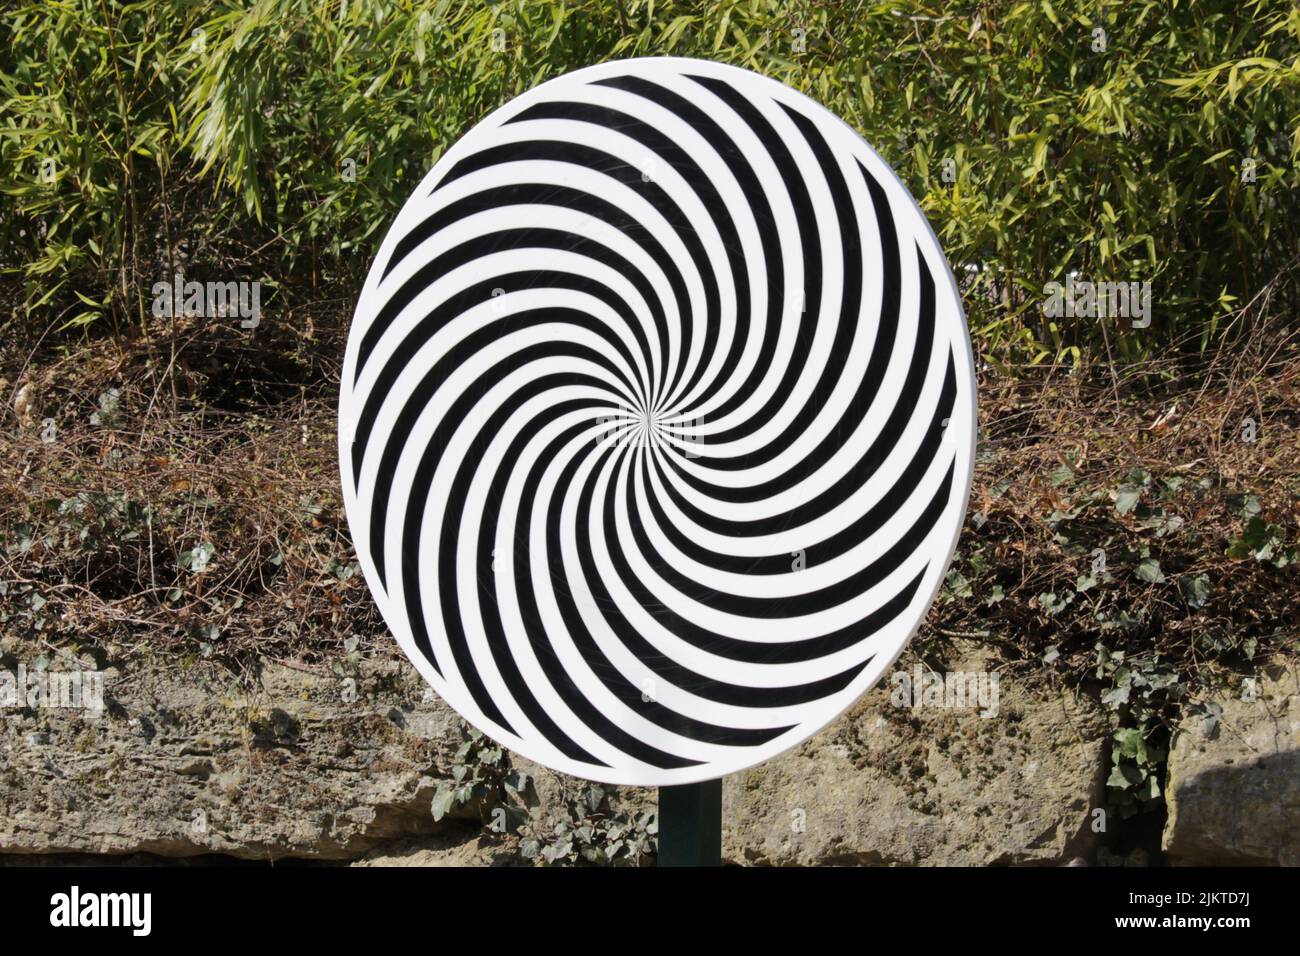 Optical illusion spiral wheel with a natural background Stock Photo